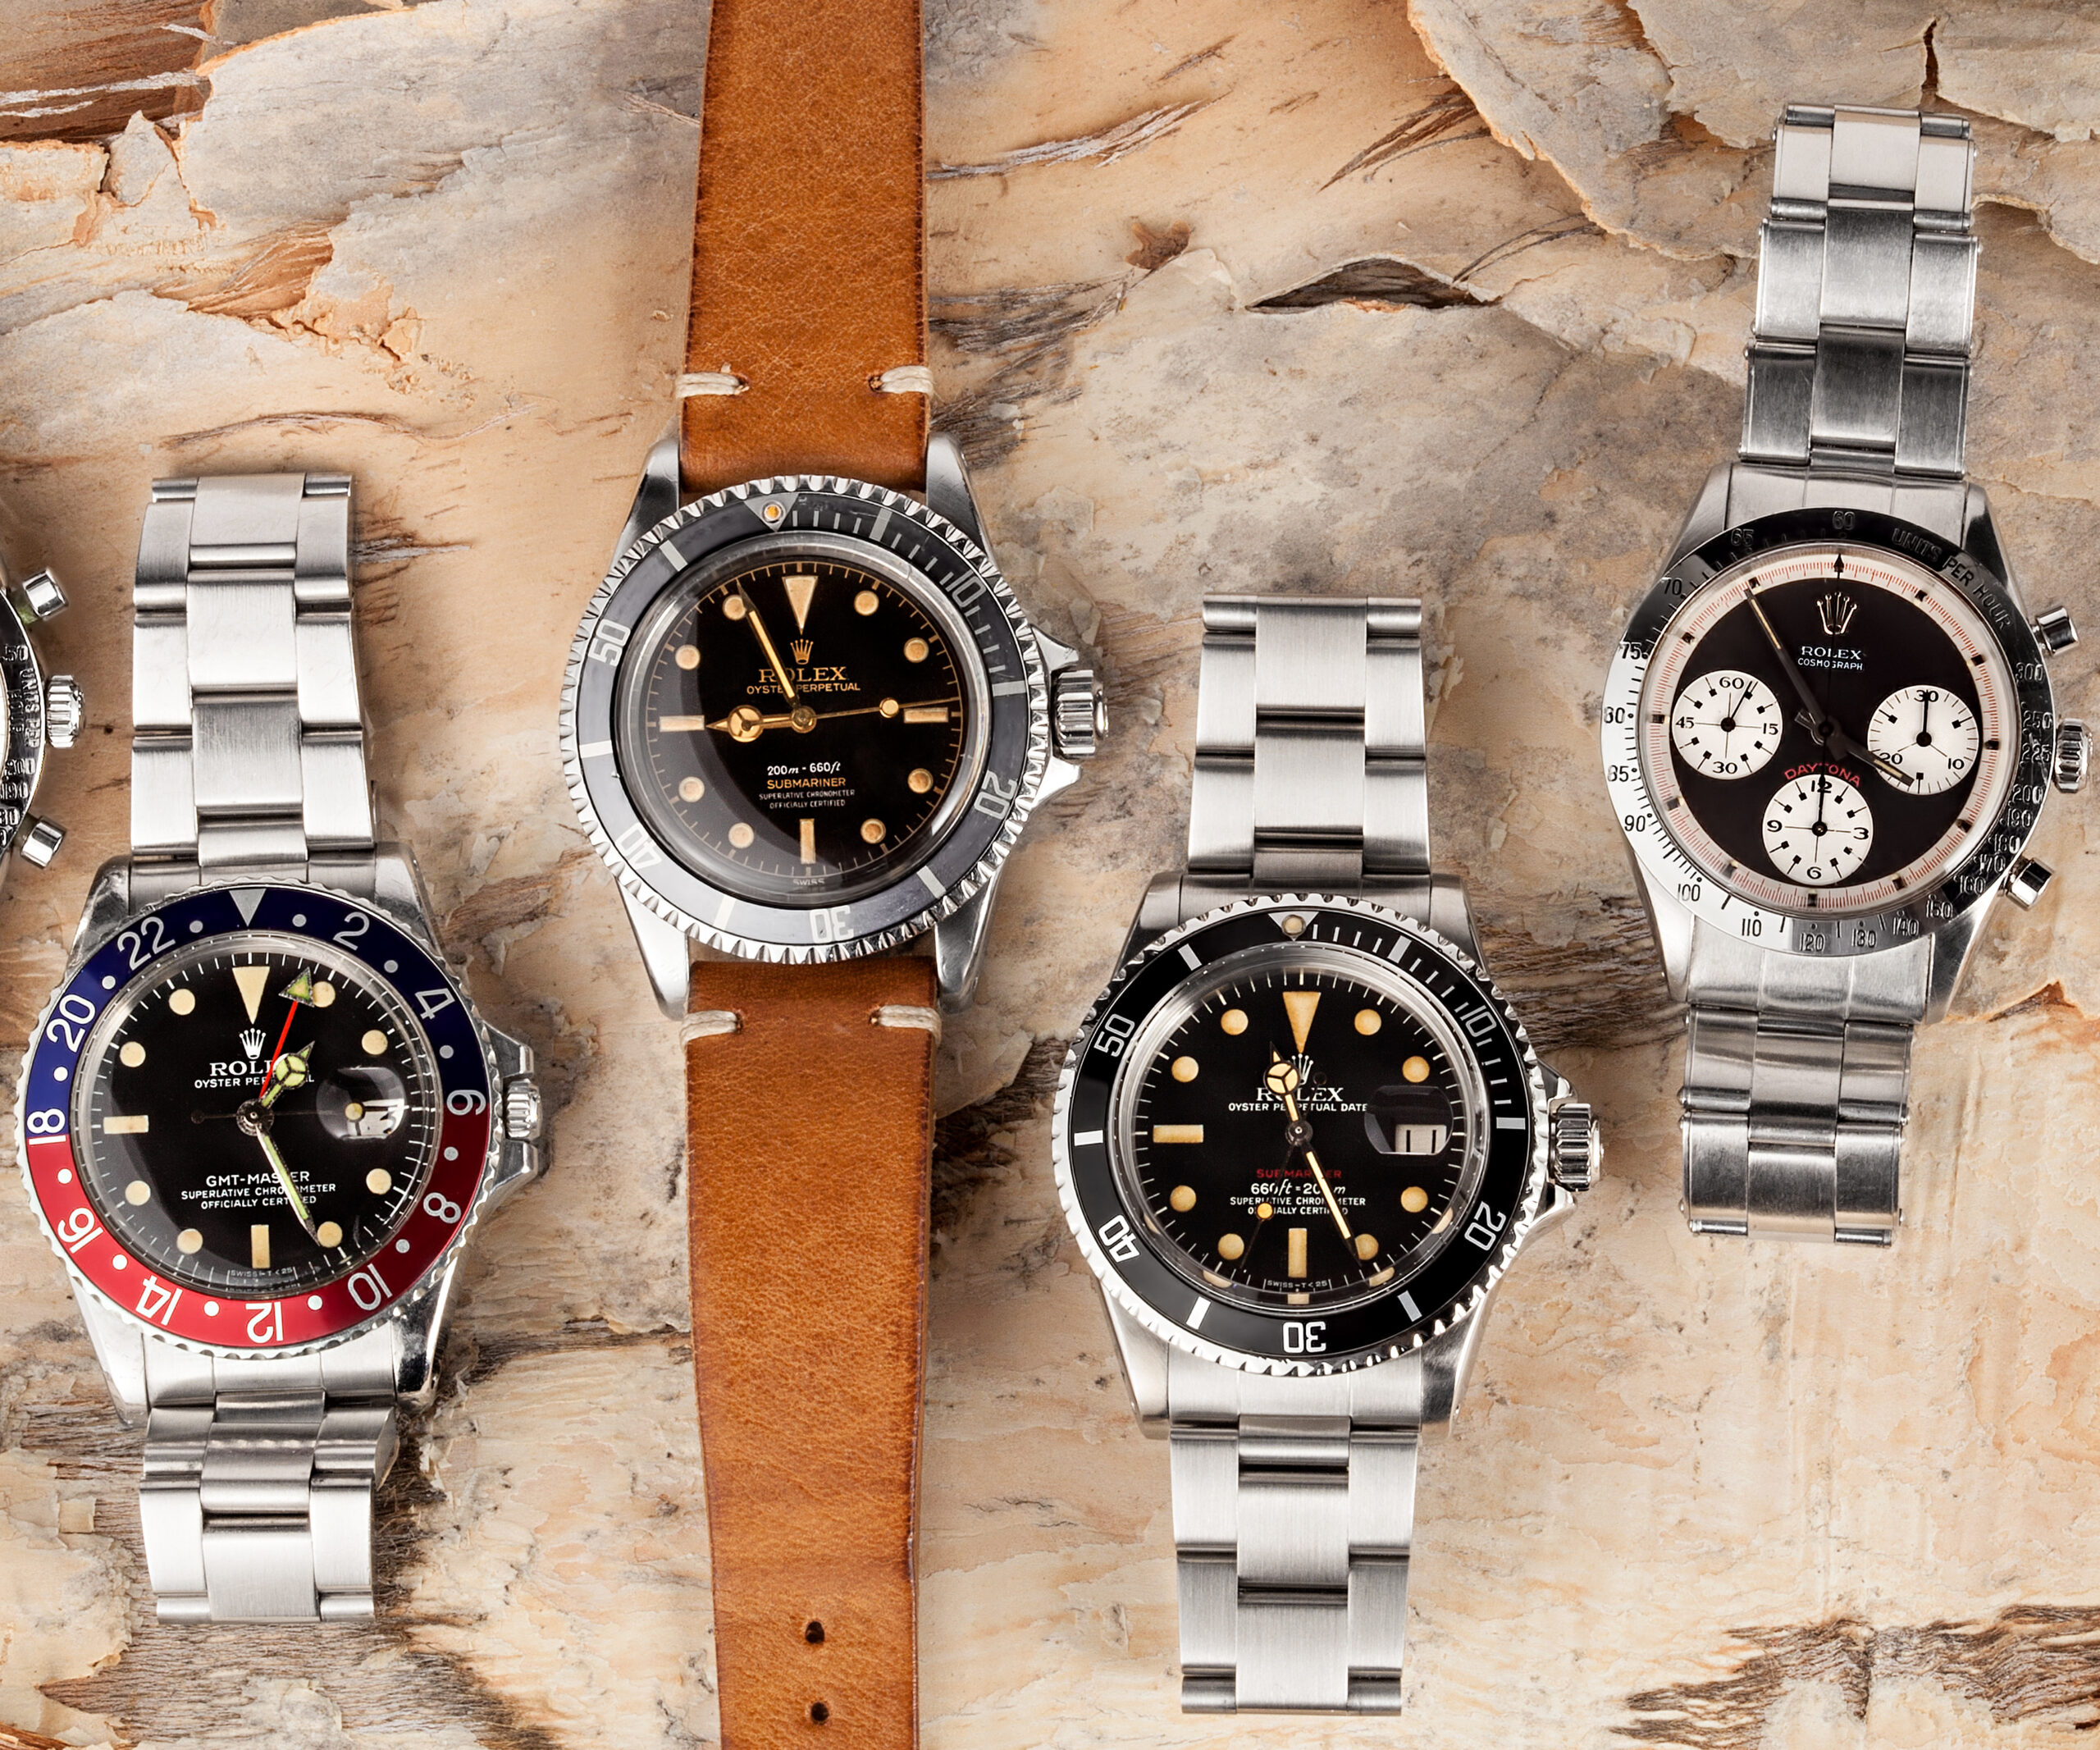 Do you apply for the Rolex Ring IPO? - Quora